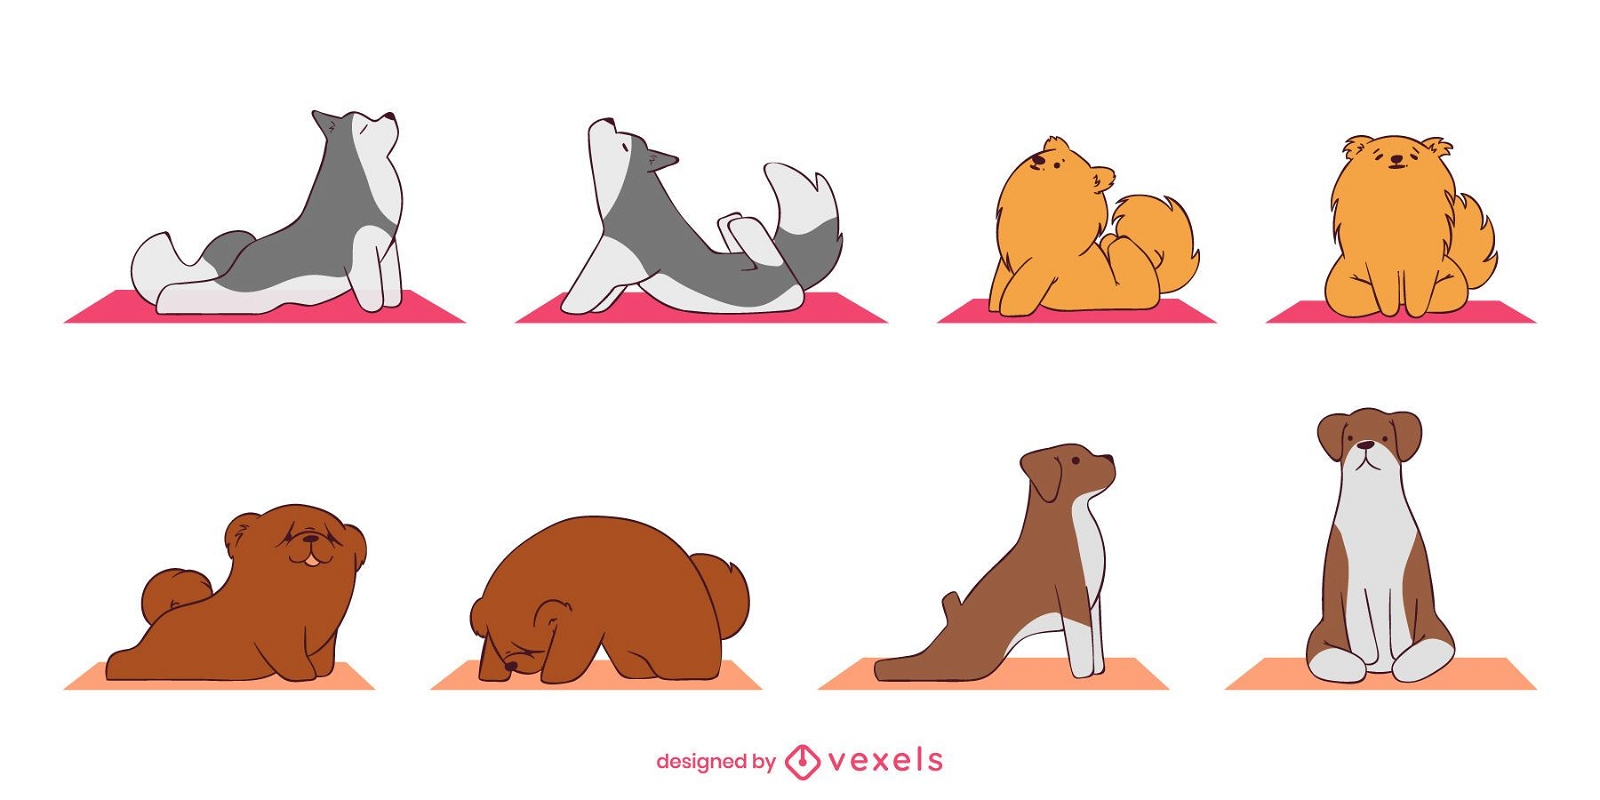 Cute Animal Clipart Funny Animals And Foxes In Various Poses Cartoon Vector  PNG Transparent Image And Clipart Image For Free Download - Lovepik |  380585667